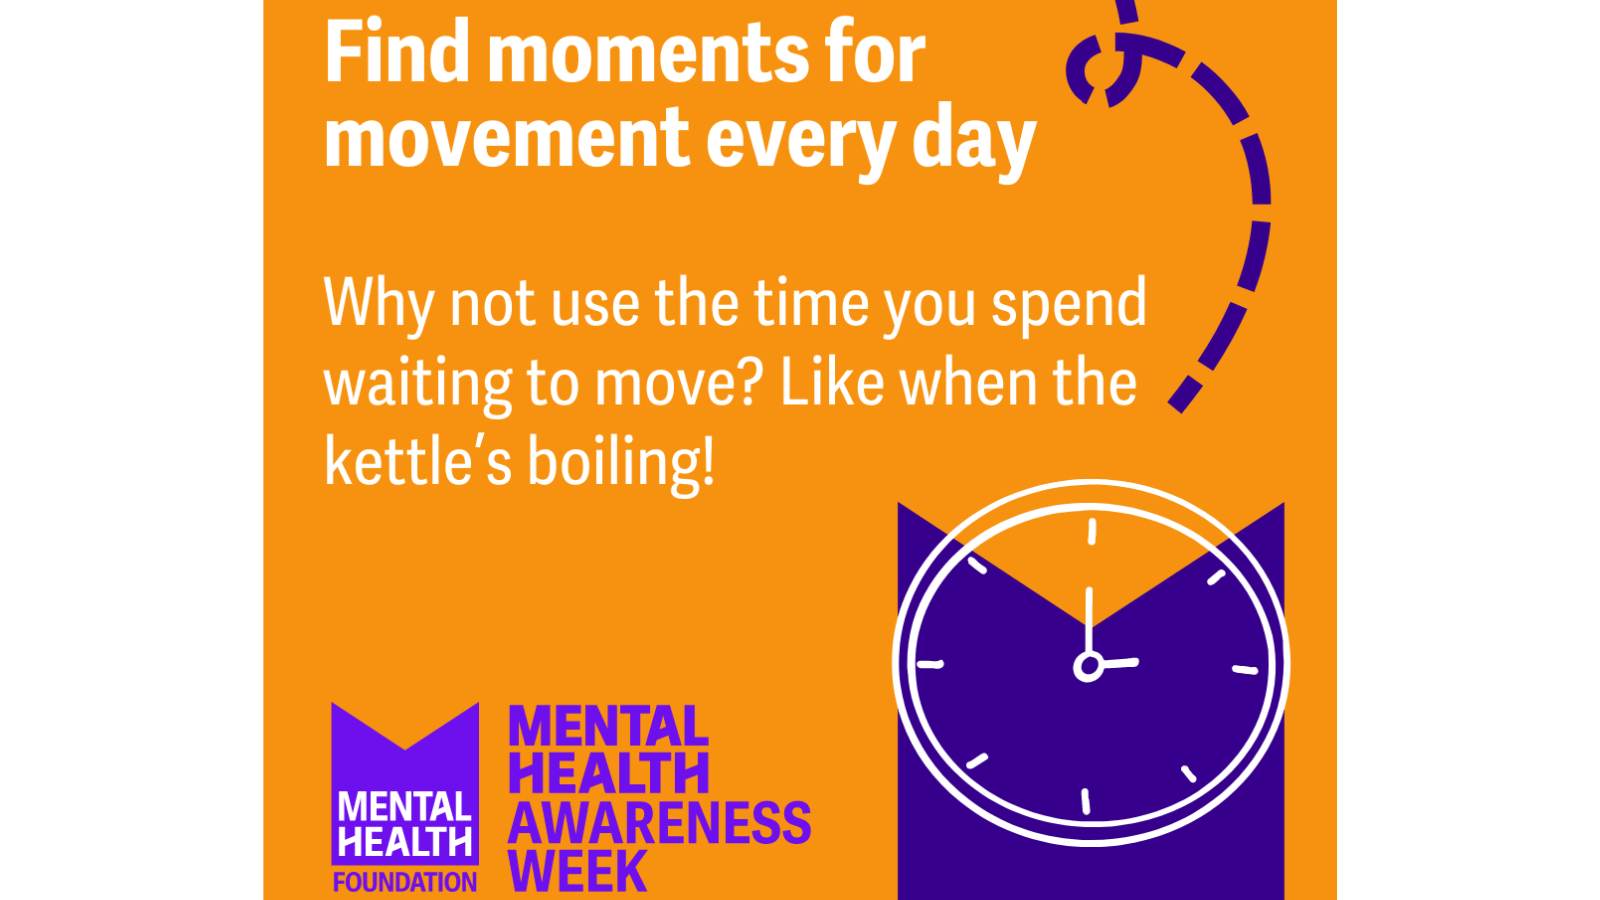 Women's Mental Health Month  - moments for movement